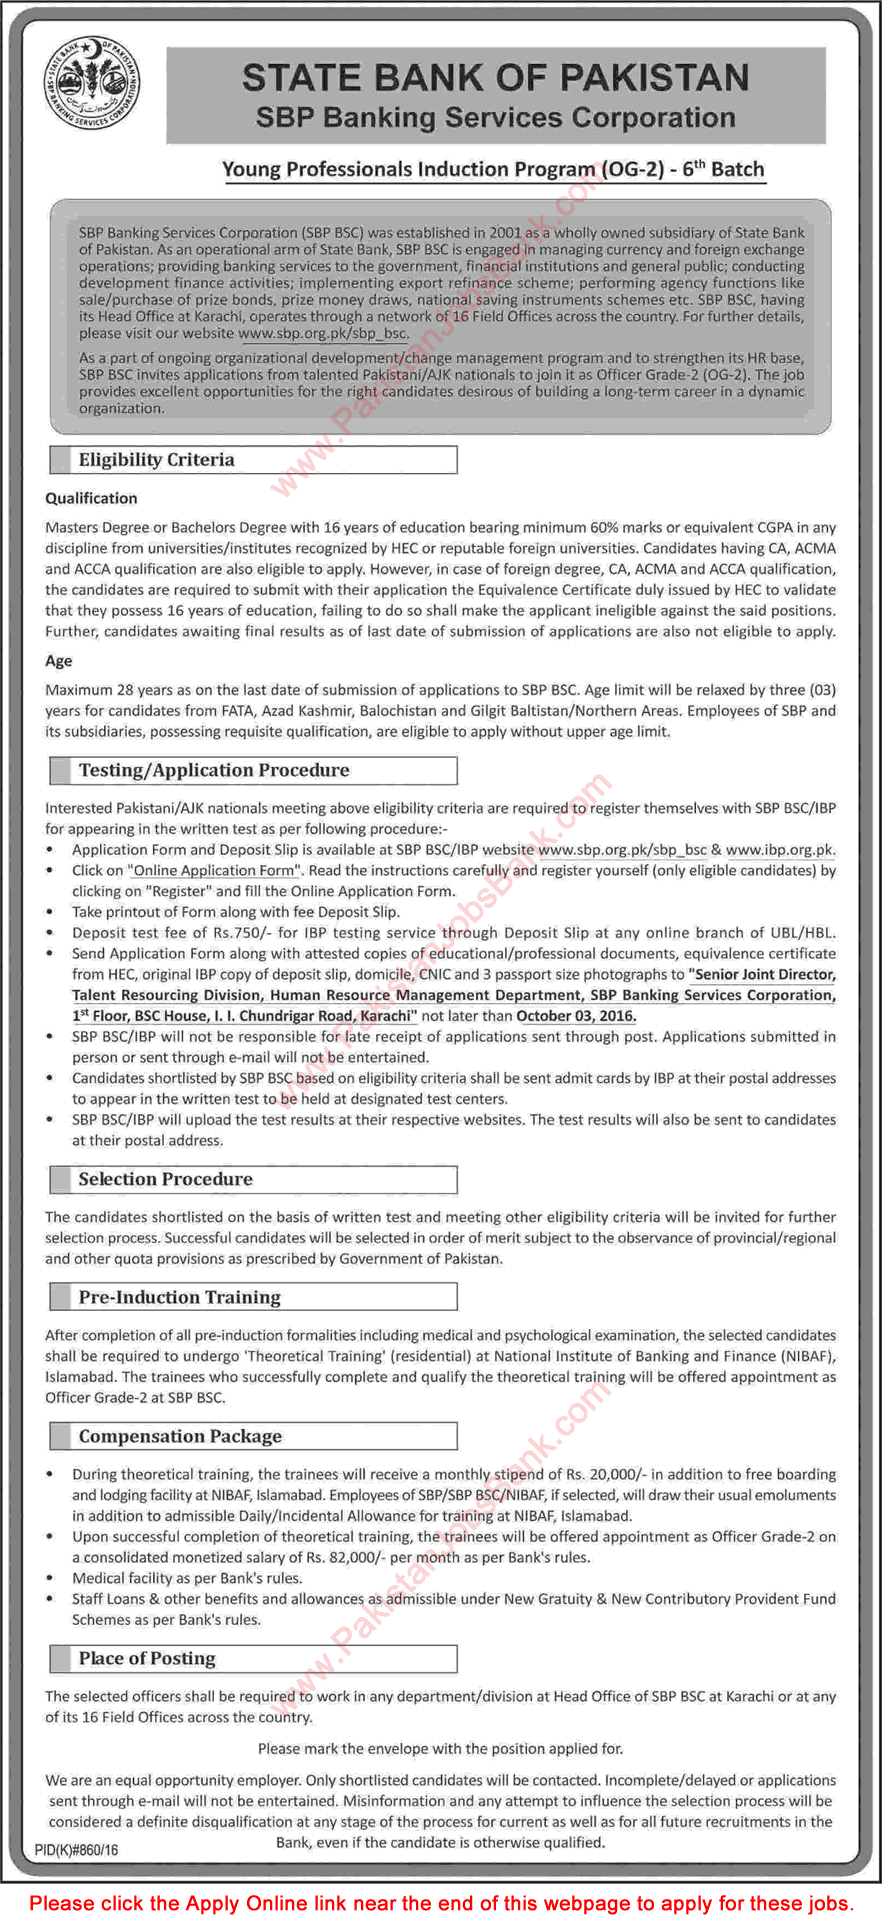 State Bank of Pakistan Young Professionals Induction Program 2016 September Apply Online 6th Batch Latest